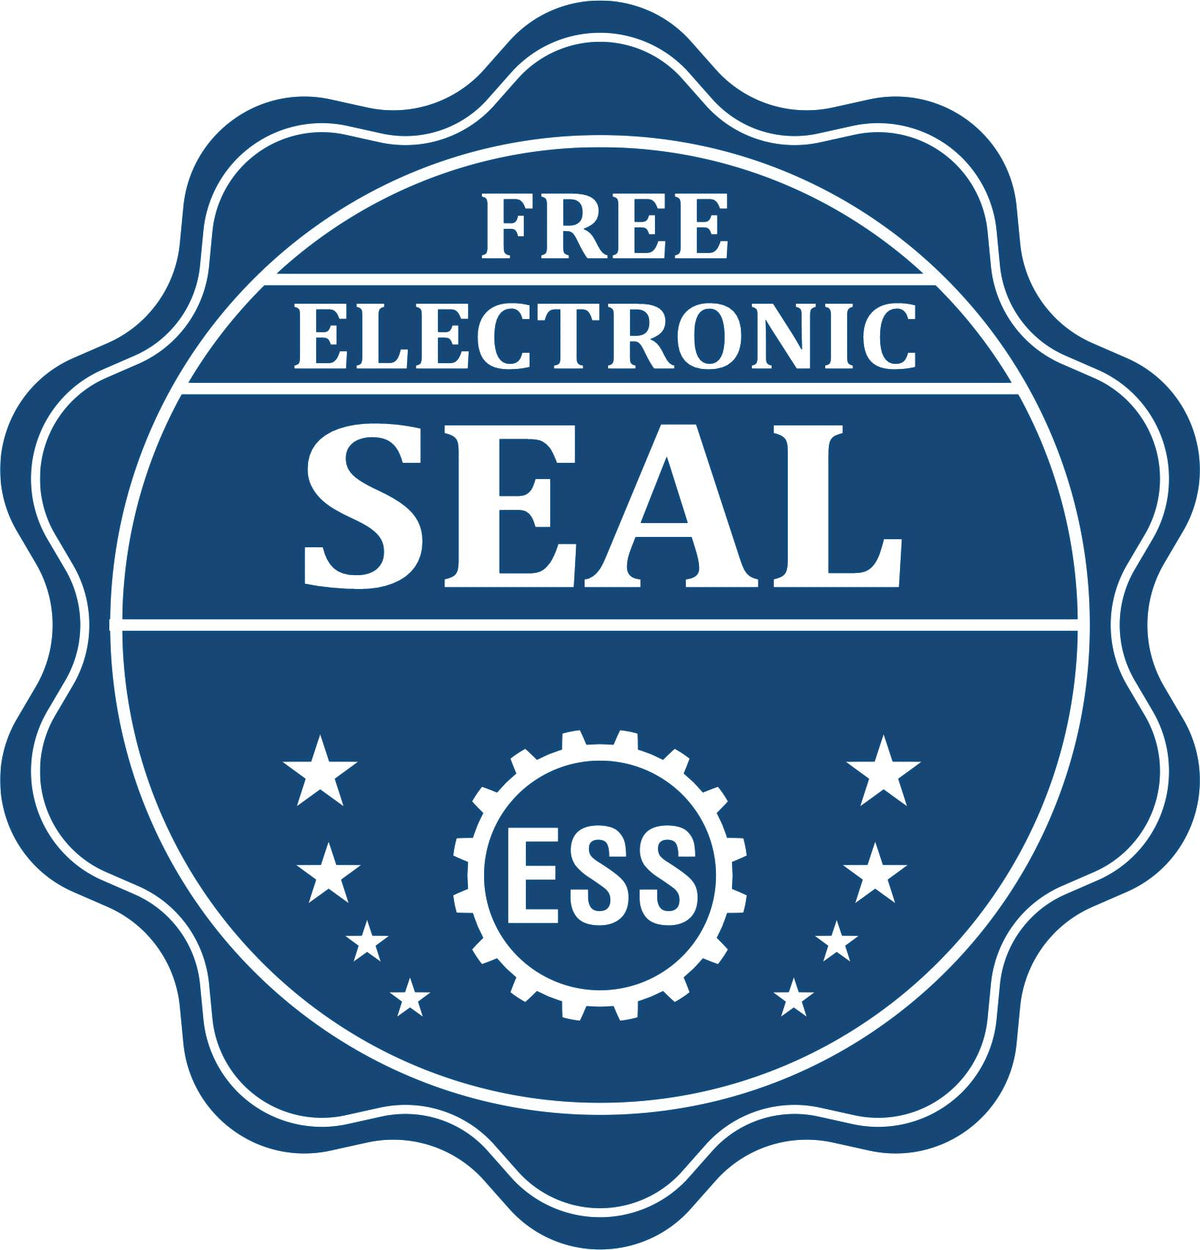 A badge showing a free electronic seal for the Gift Kentucky Land Surveyor Seal with stars and the ESS gear on the emblem.